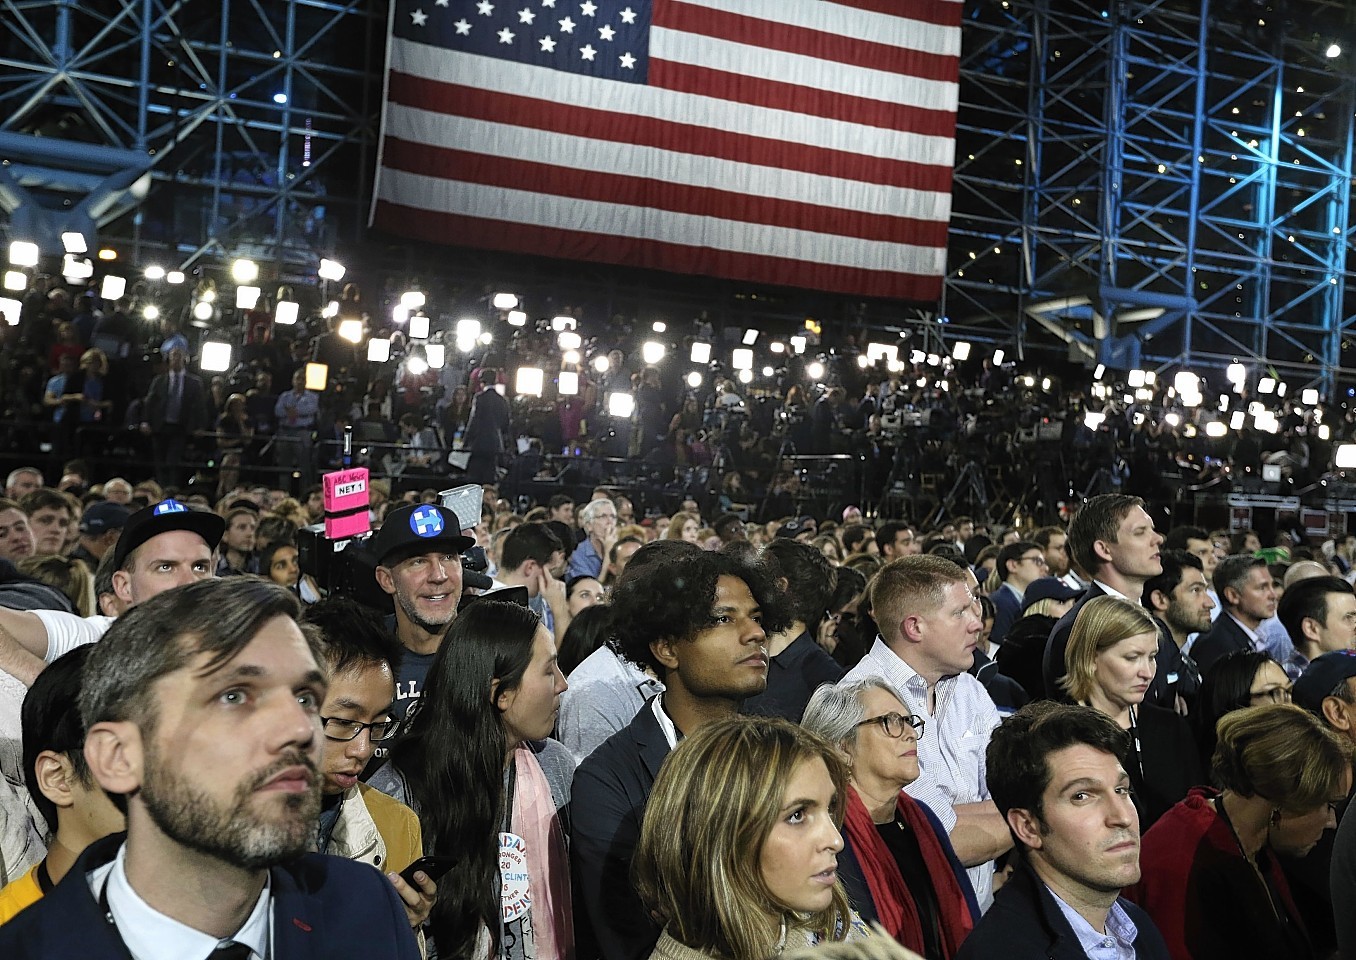 Supporters watch election results during Democratic presidential nominee Hillary Clinton's election night rally in the Jacob Javits Center glass enclosed lobby in New York, Tuesday, Nov. 8, 2016. (AP Photo/Frank Franklin II)